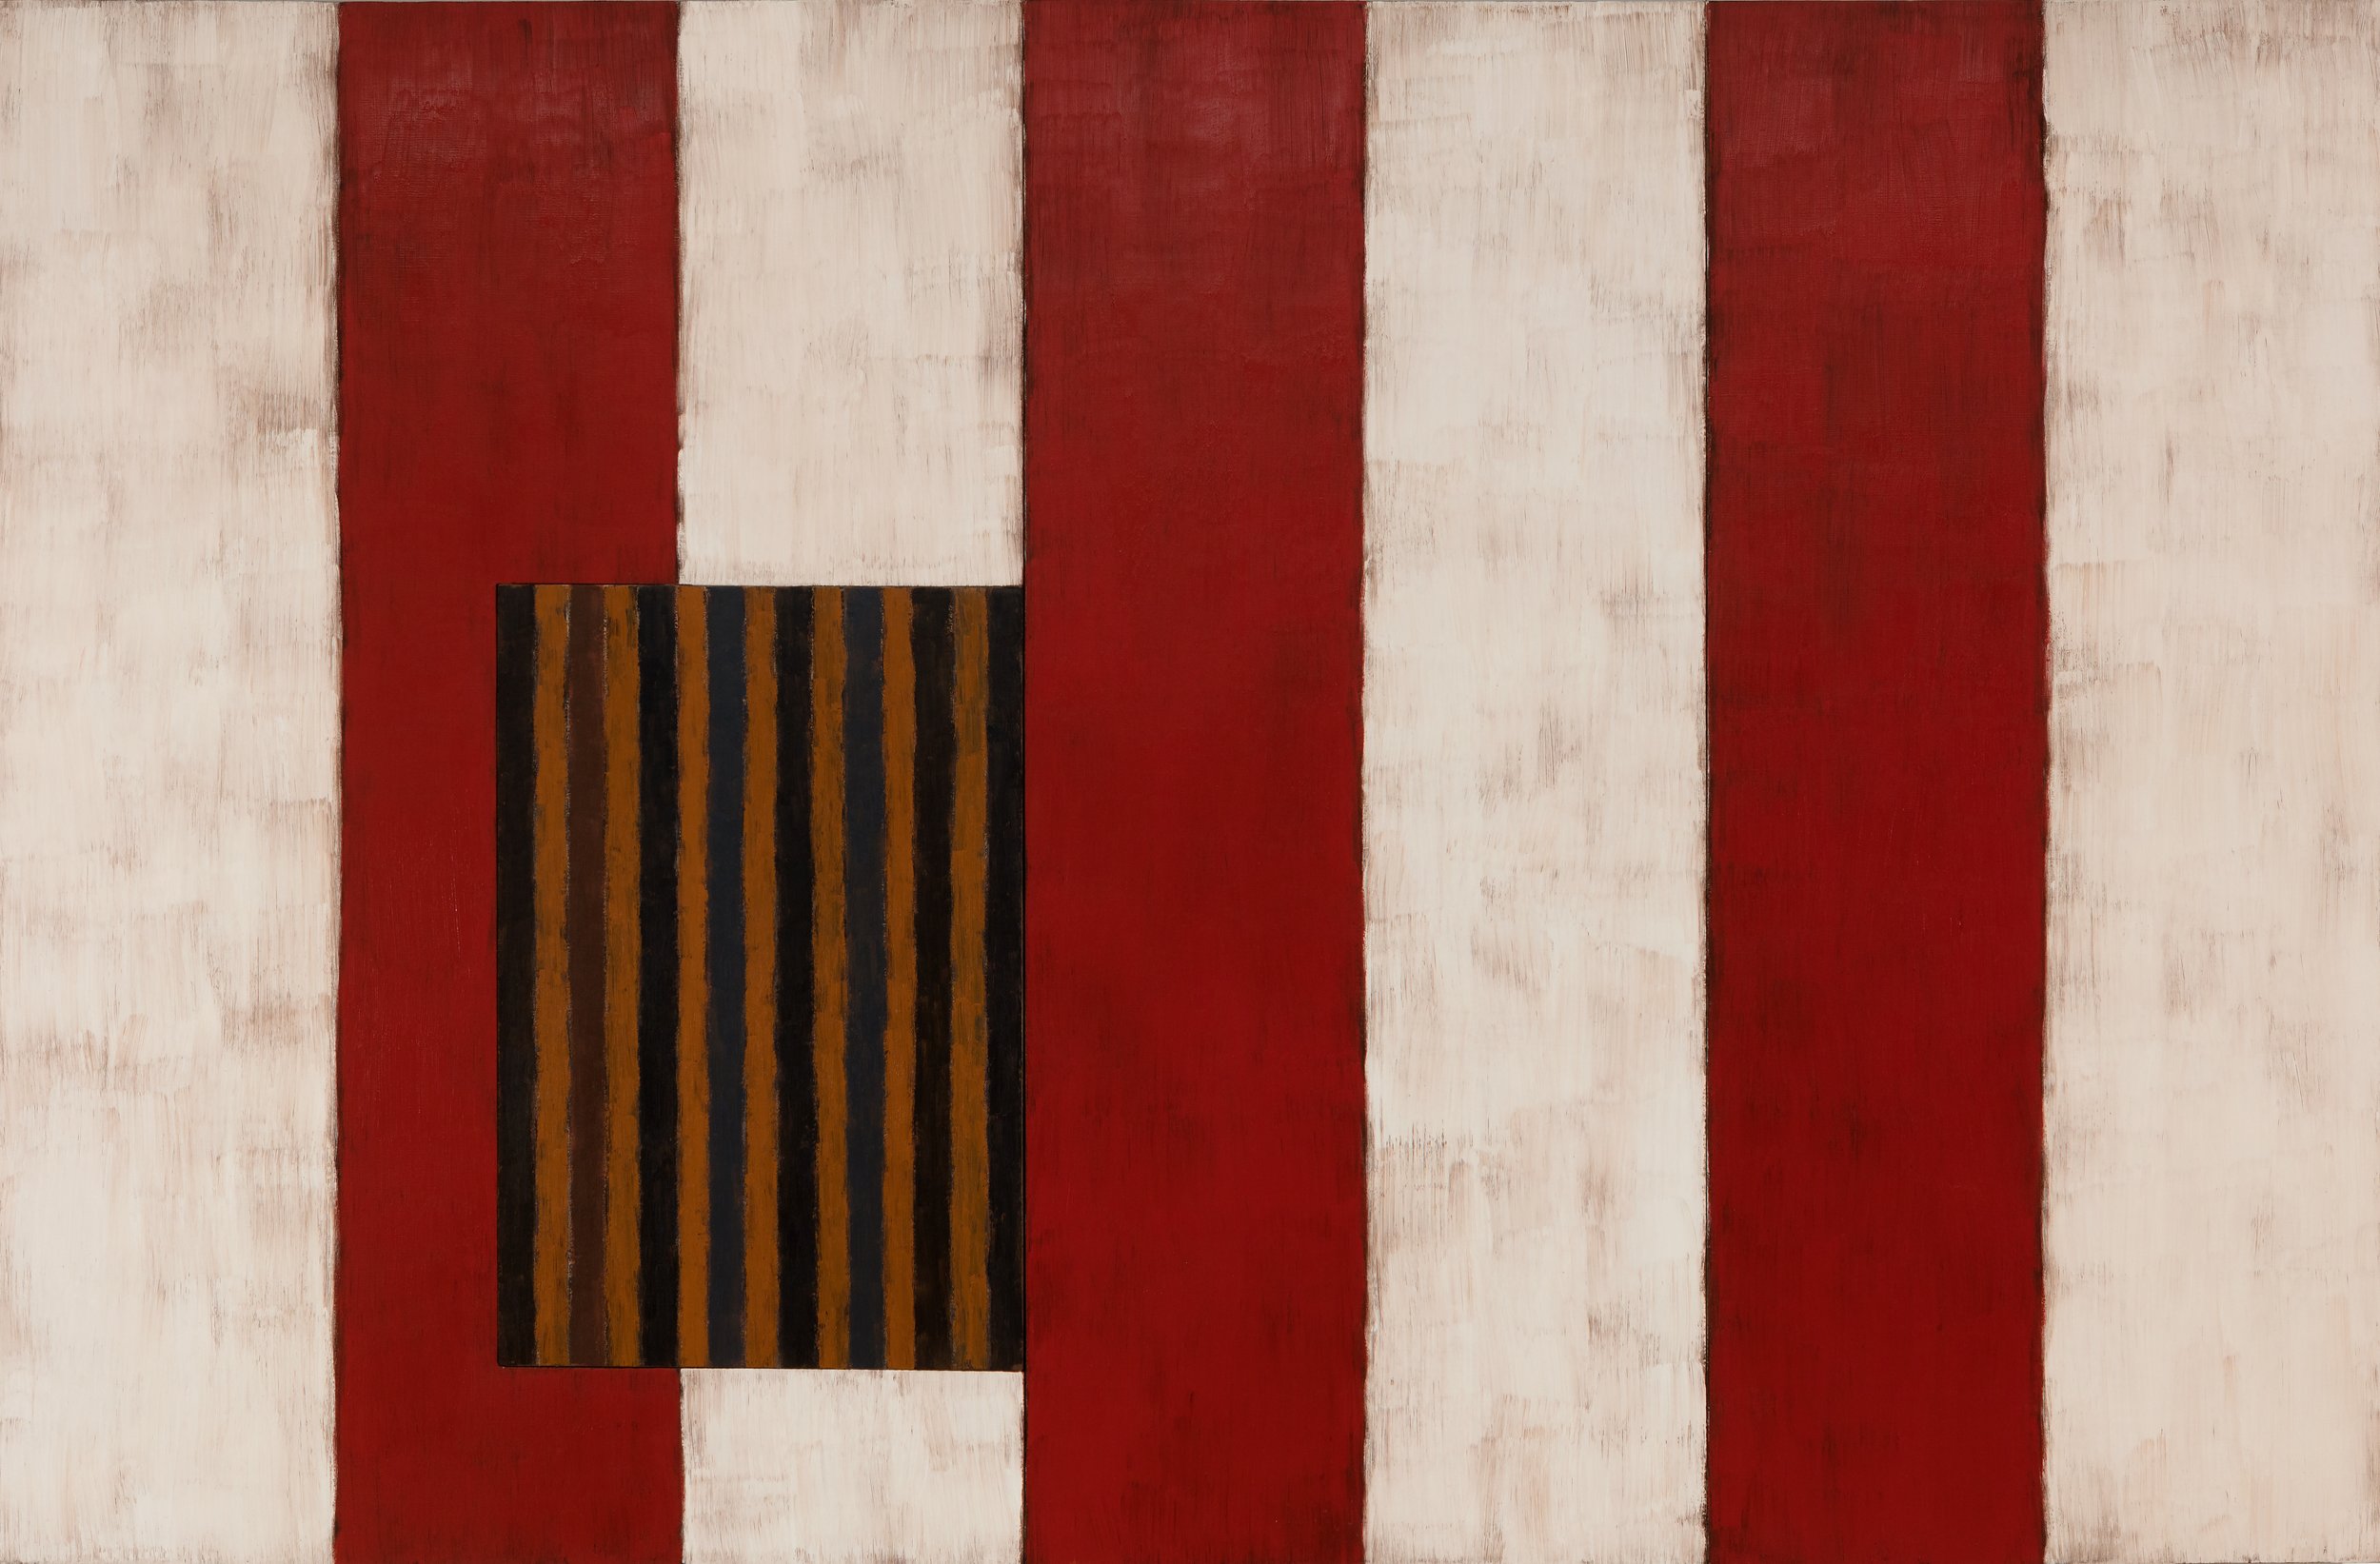 image09-seanscully-palefire-1988.jpg